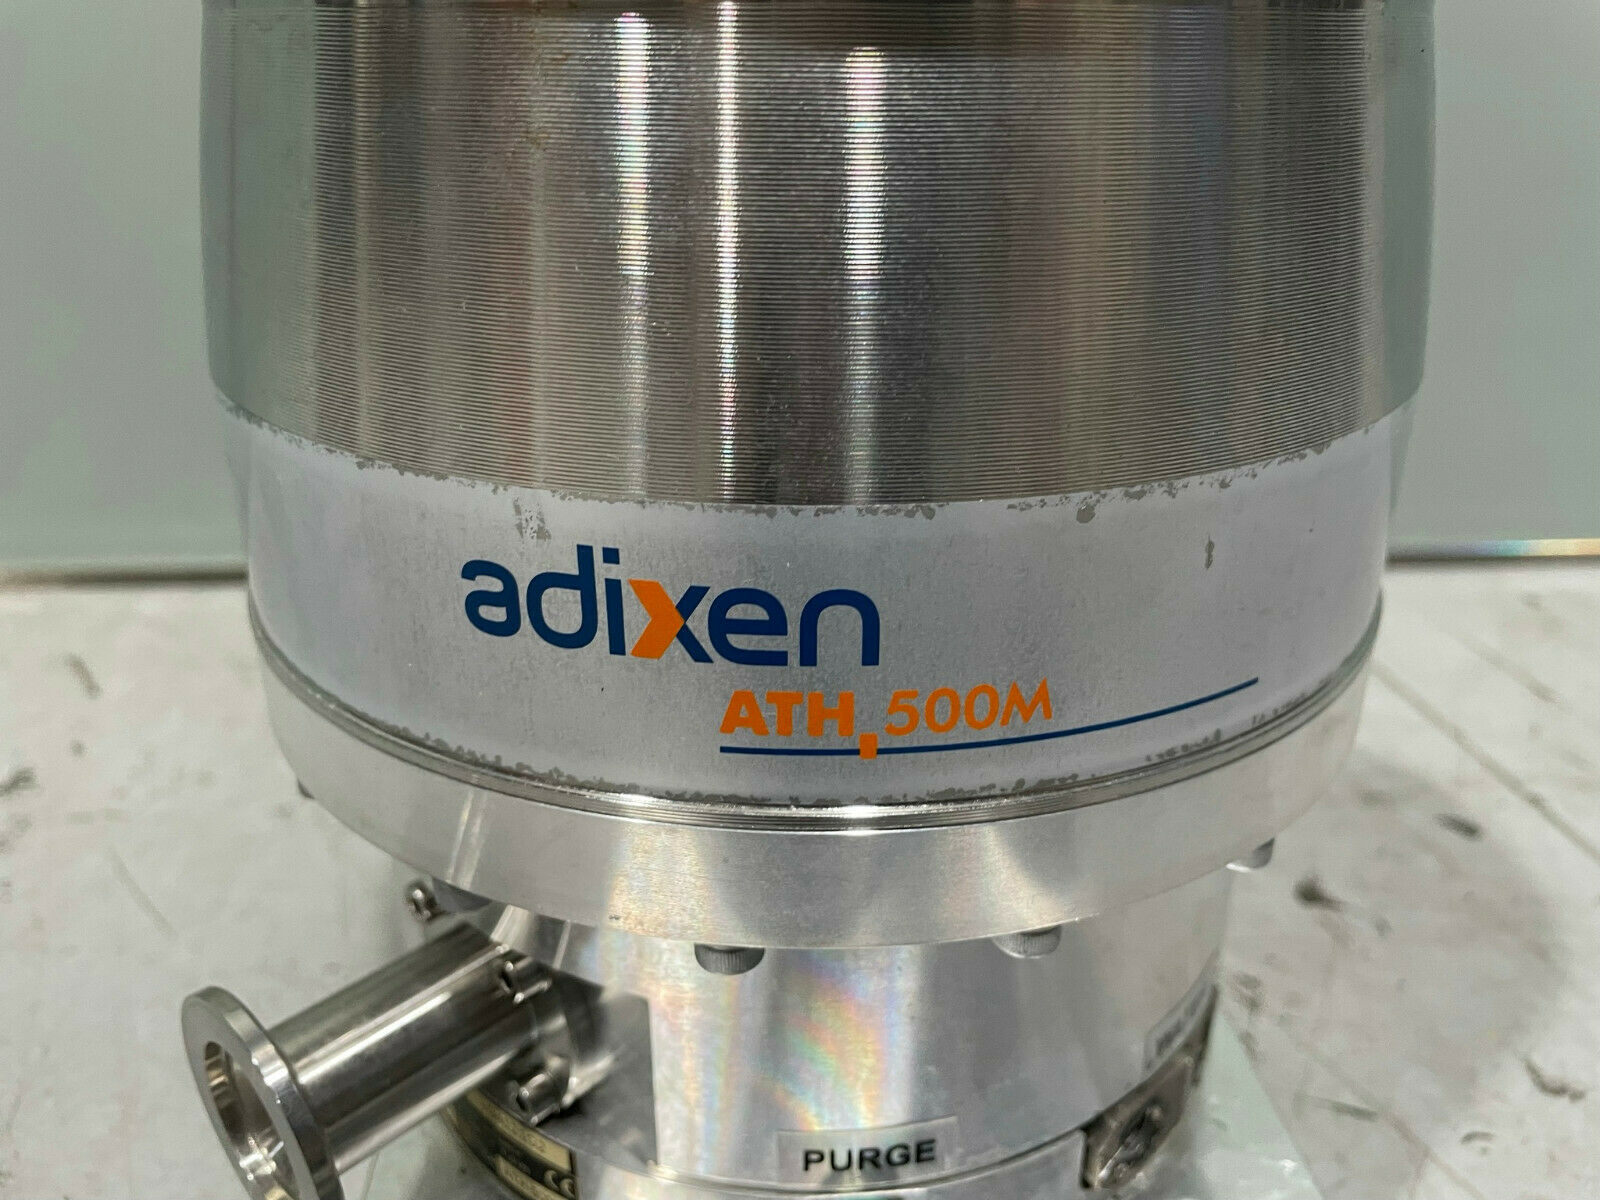 ALCATEL ADIXEN ATH 500M TURBOPUMP With or without Profibus 